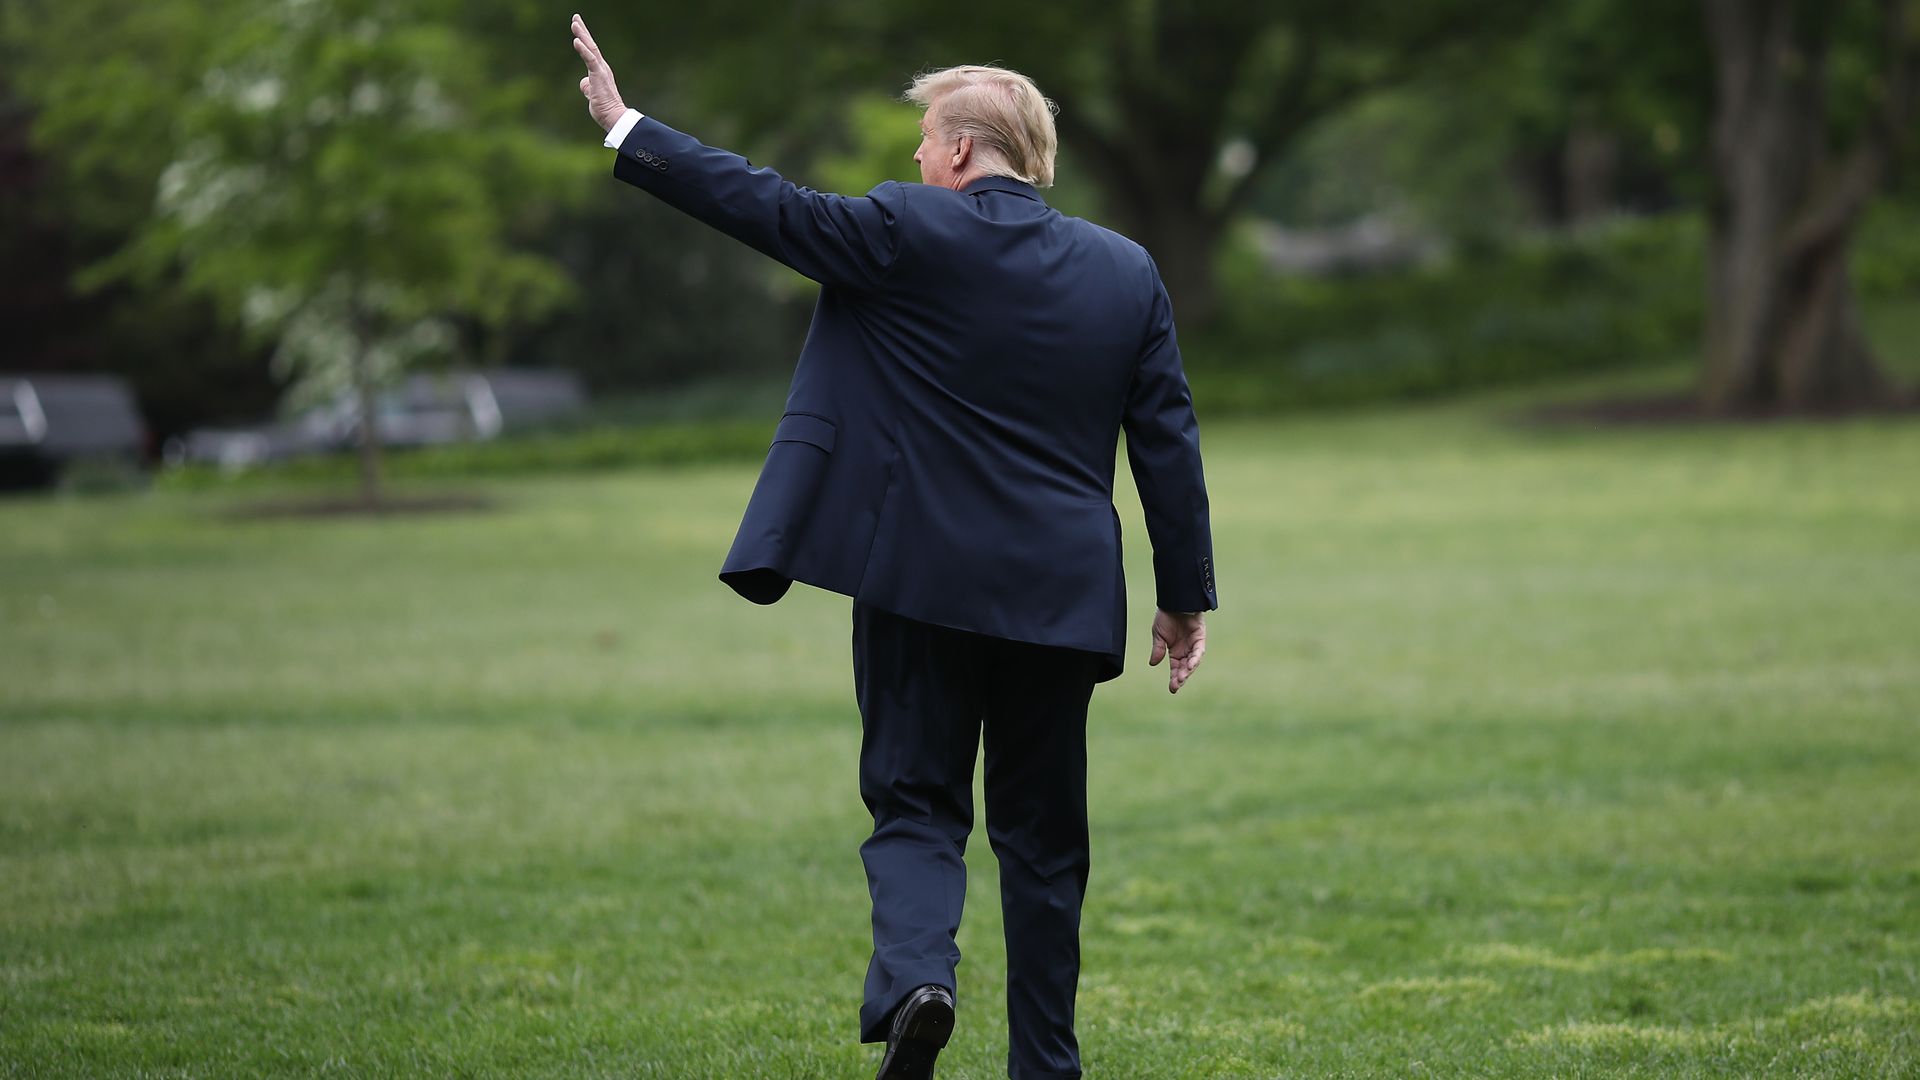 In this image, Trump walks away from the camera and waves, facing the left. 